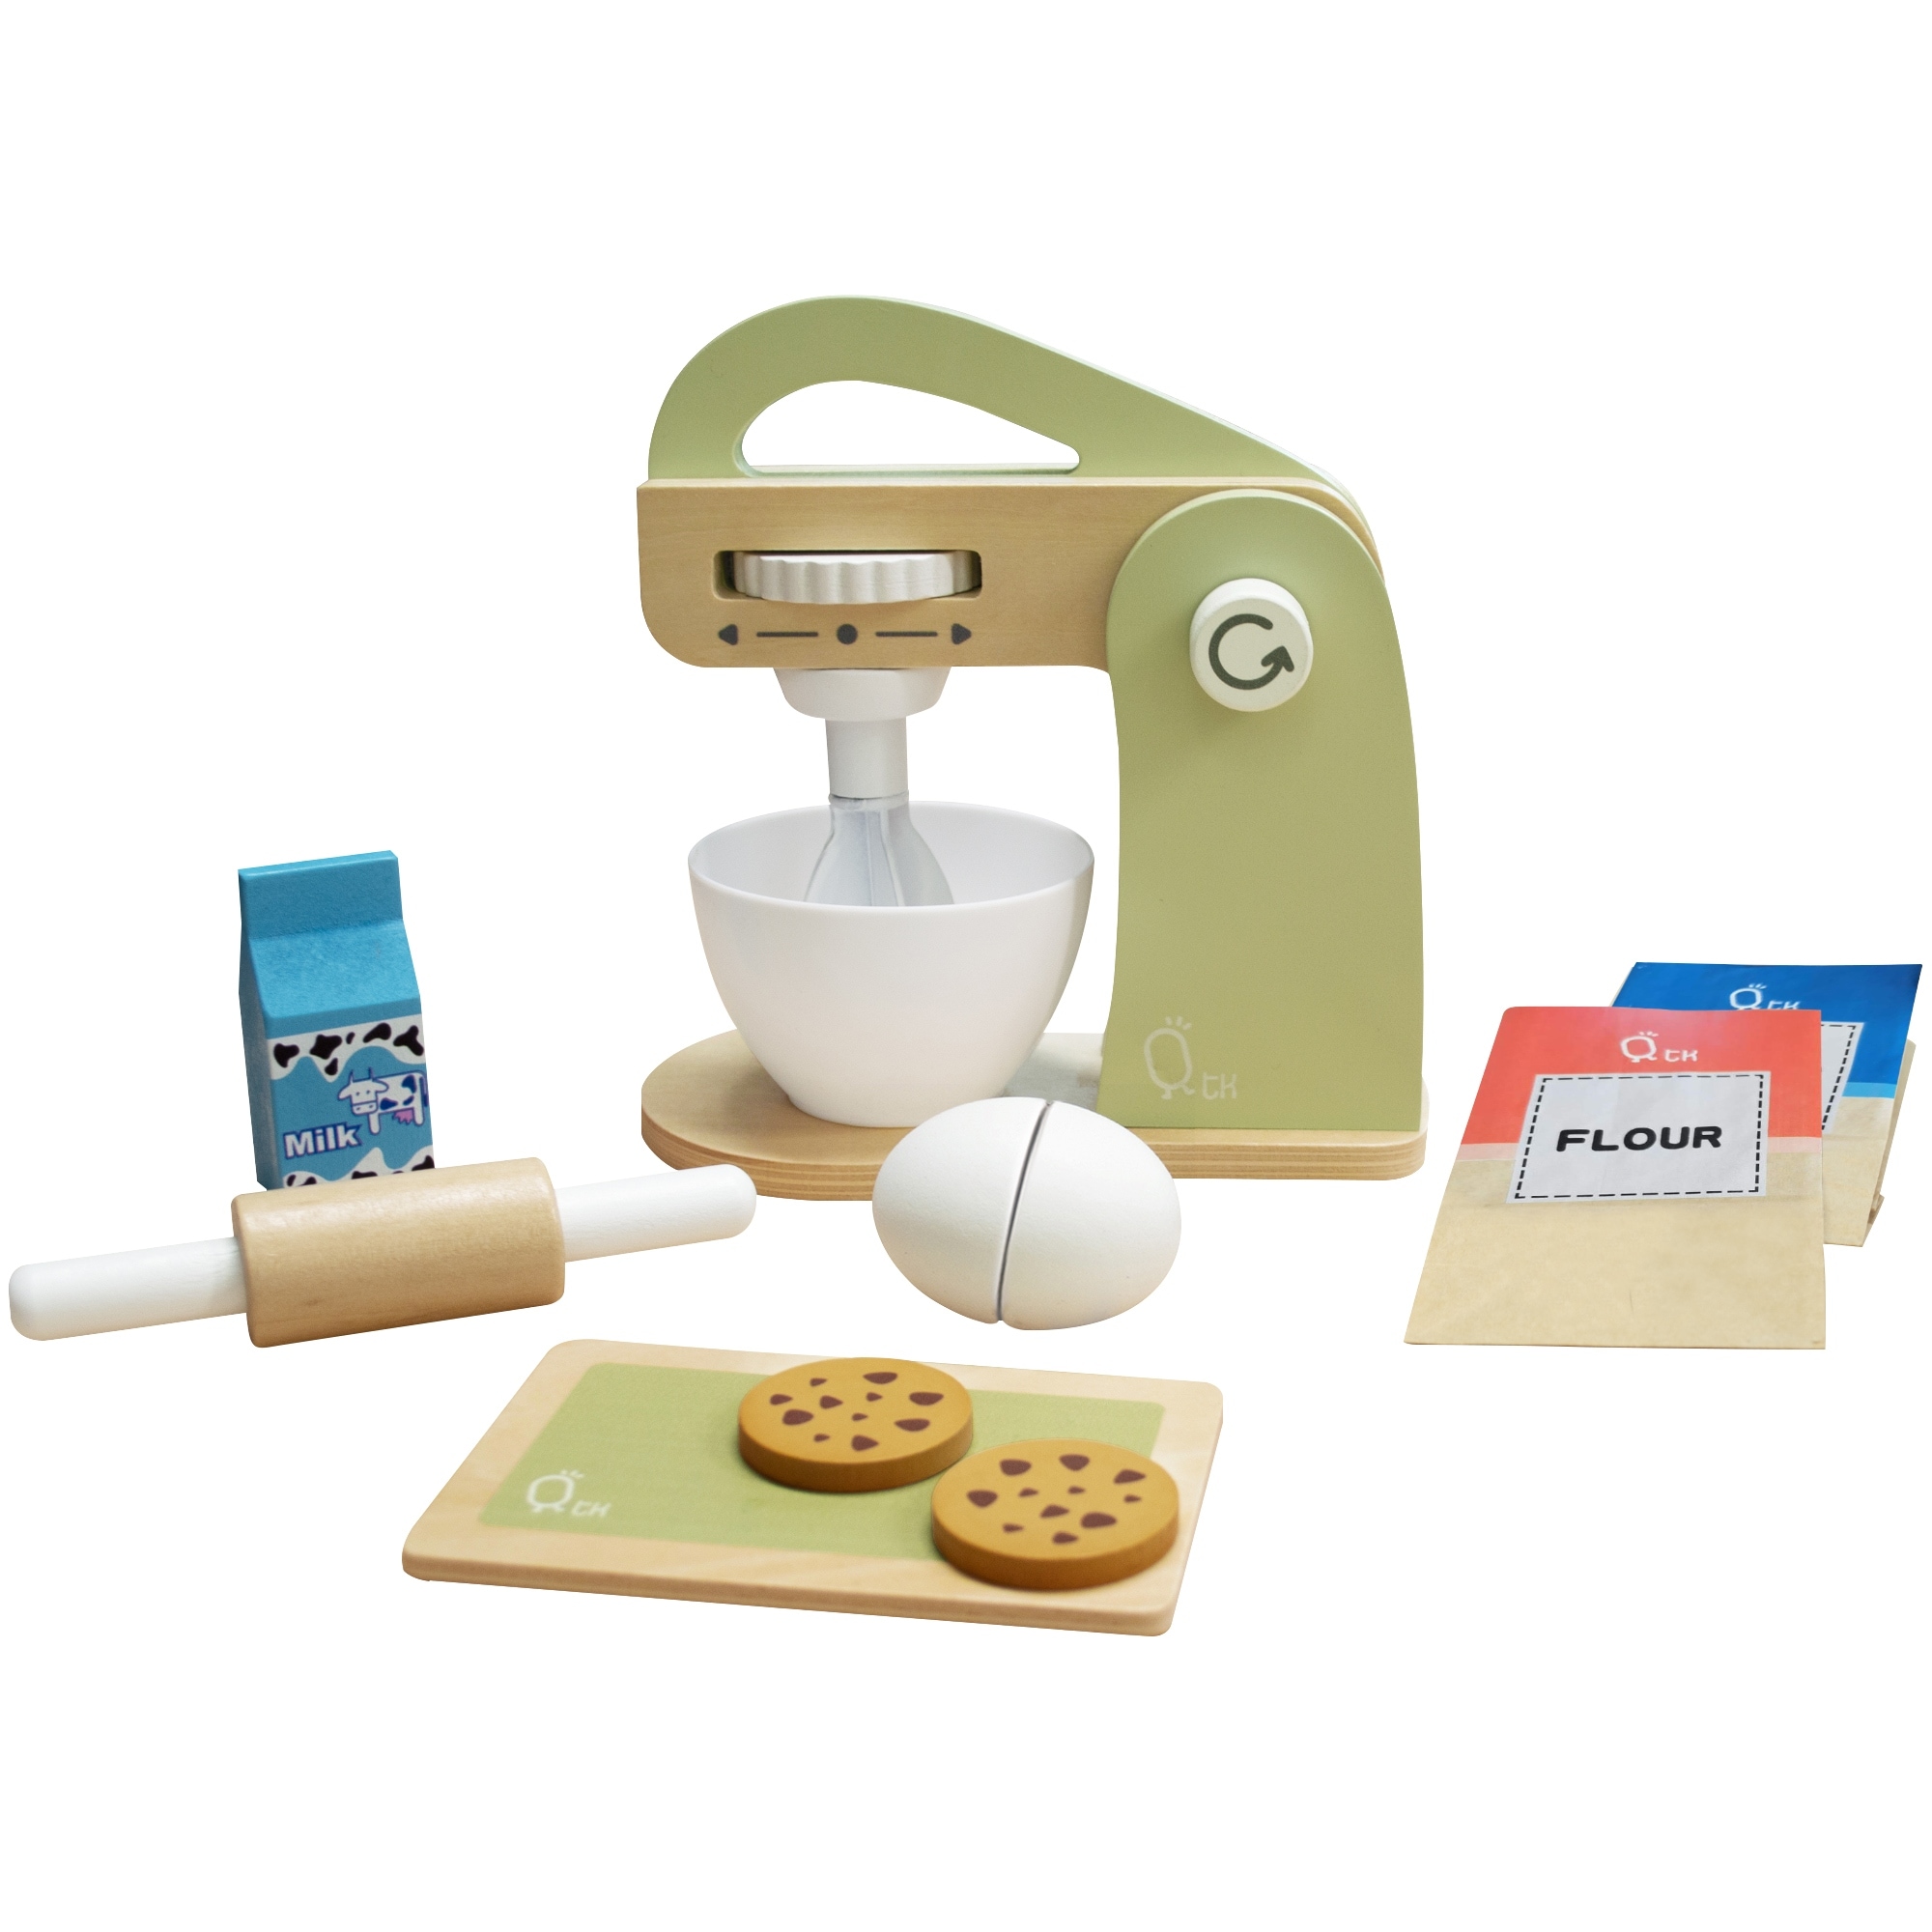 https://ak1.ostkcdn.com/images/products/is/images/direct/0e18e4f40676c01f79c91835a8138fca56146fbc/Teamson-Kids---Little-Chef-Frankfurt-Wooden-Mixer-play-kitchen-accessories---Green.jpg